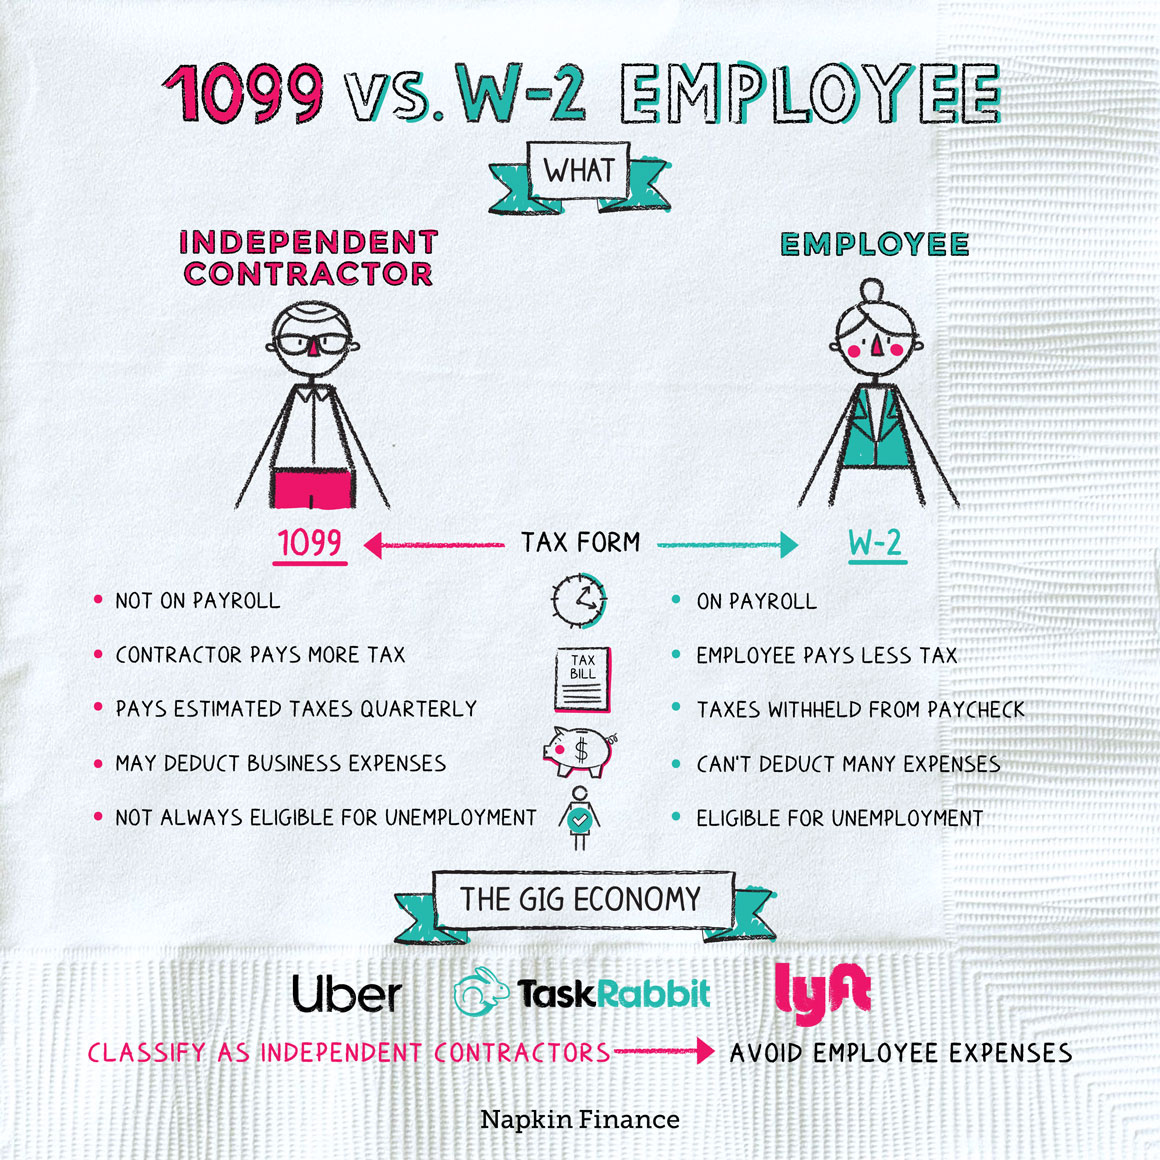 What Is A 1099 Vs W-2 Employee? – Napkin Finance with regard to What Is The Difference Between W2 And 1099 Form